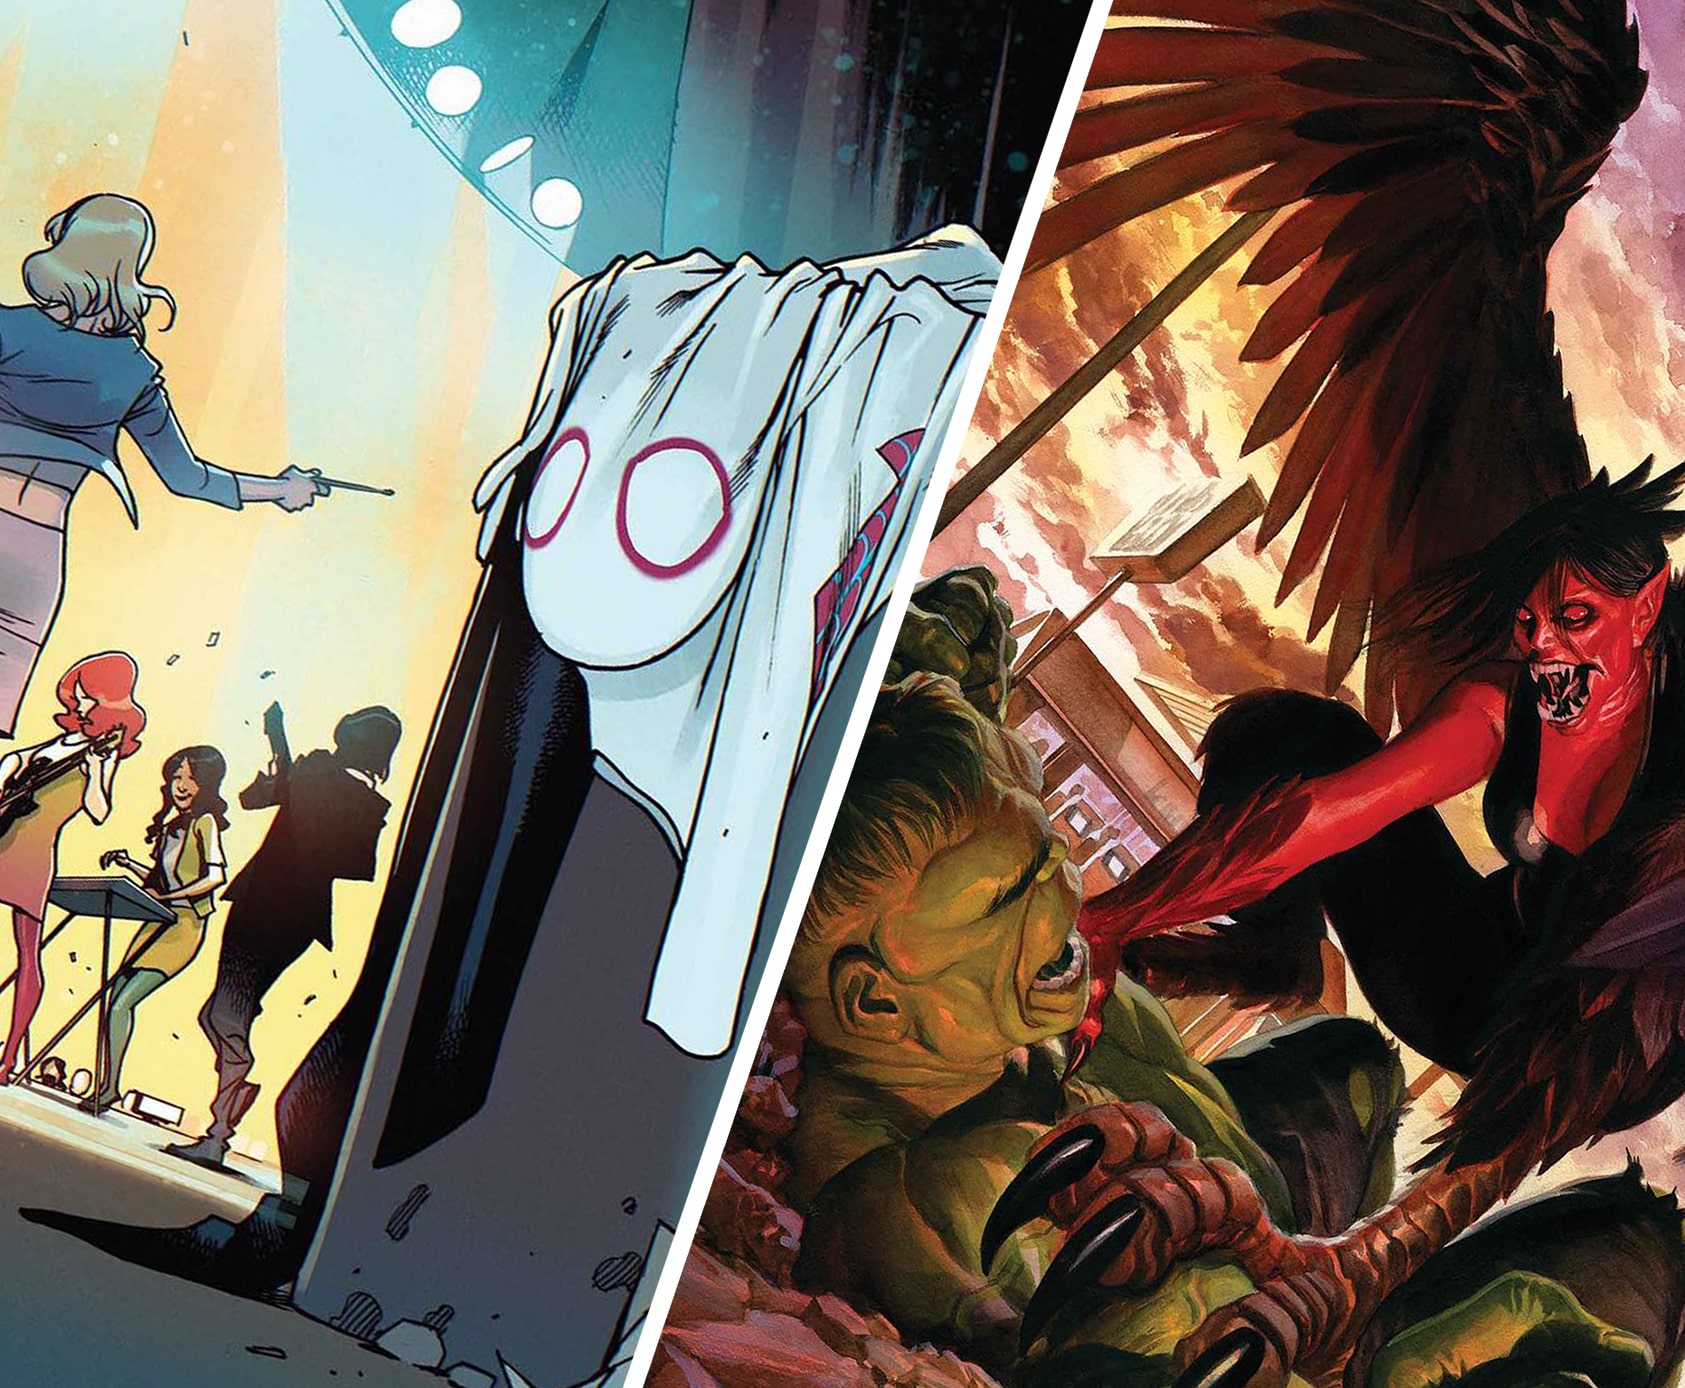 AiPT! Comics Podcast Ep 27: Sina Grace steps up, Marvel plays around, & a Spider-Month preview